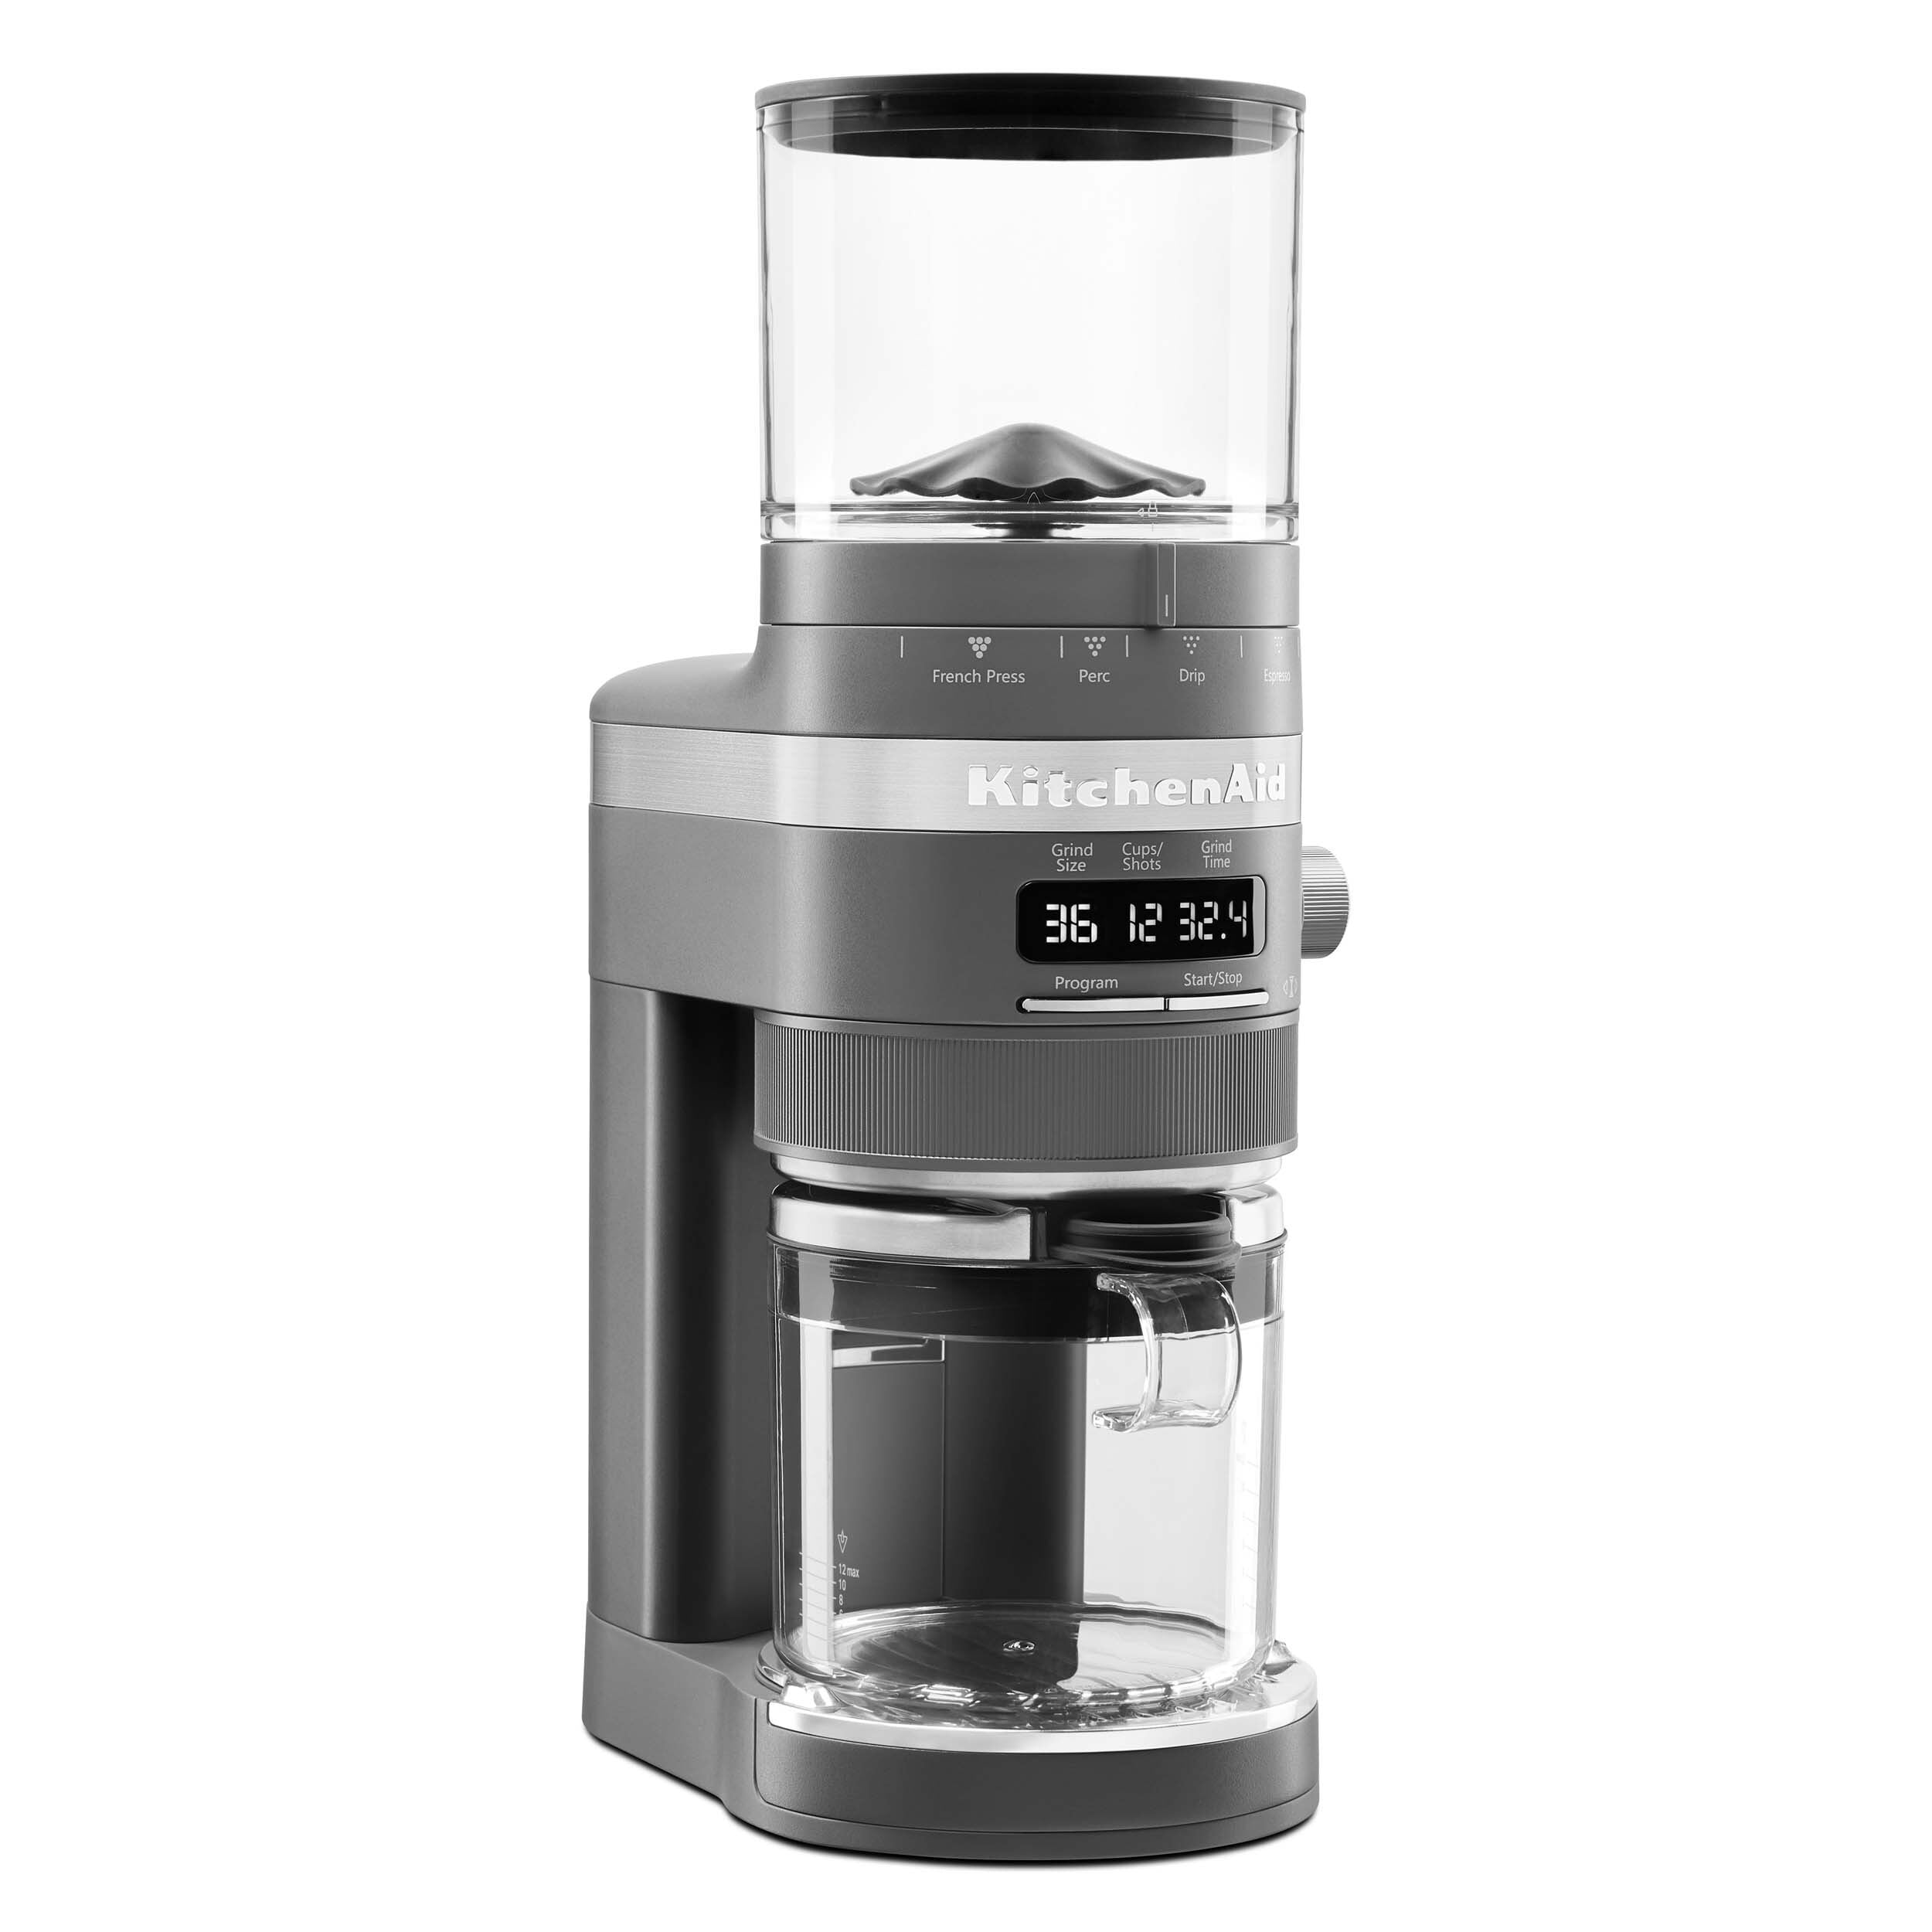 OXO Brew Stainless Steel Conical Burr Coffee Grinder - 8717000 NWOB  719812093611